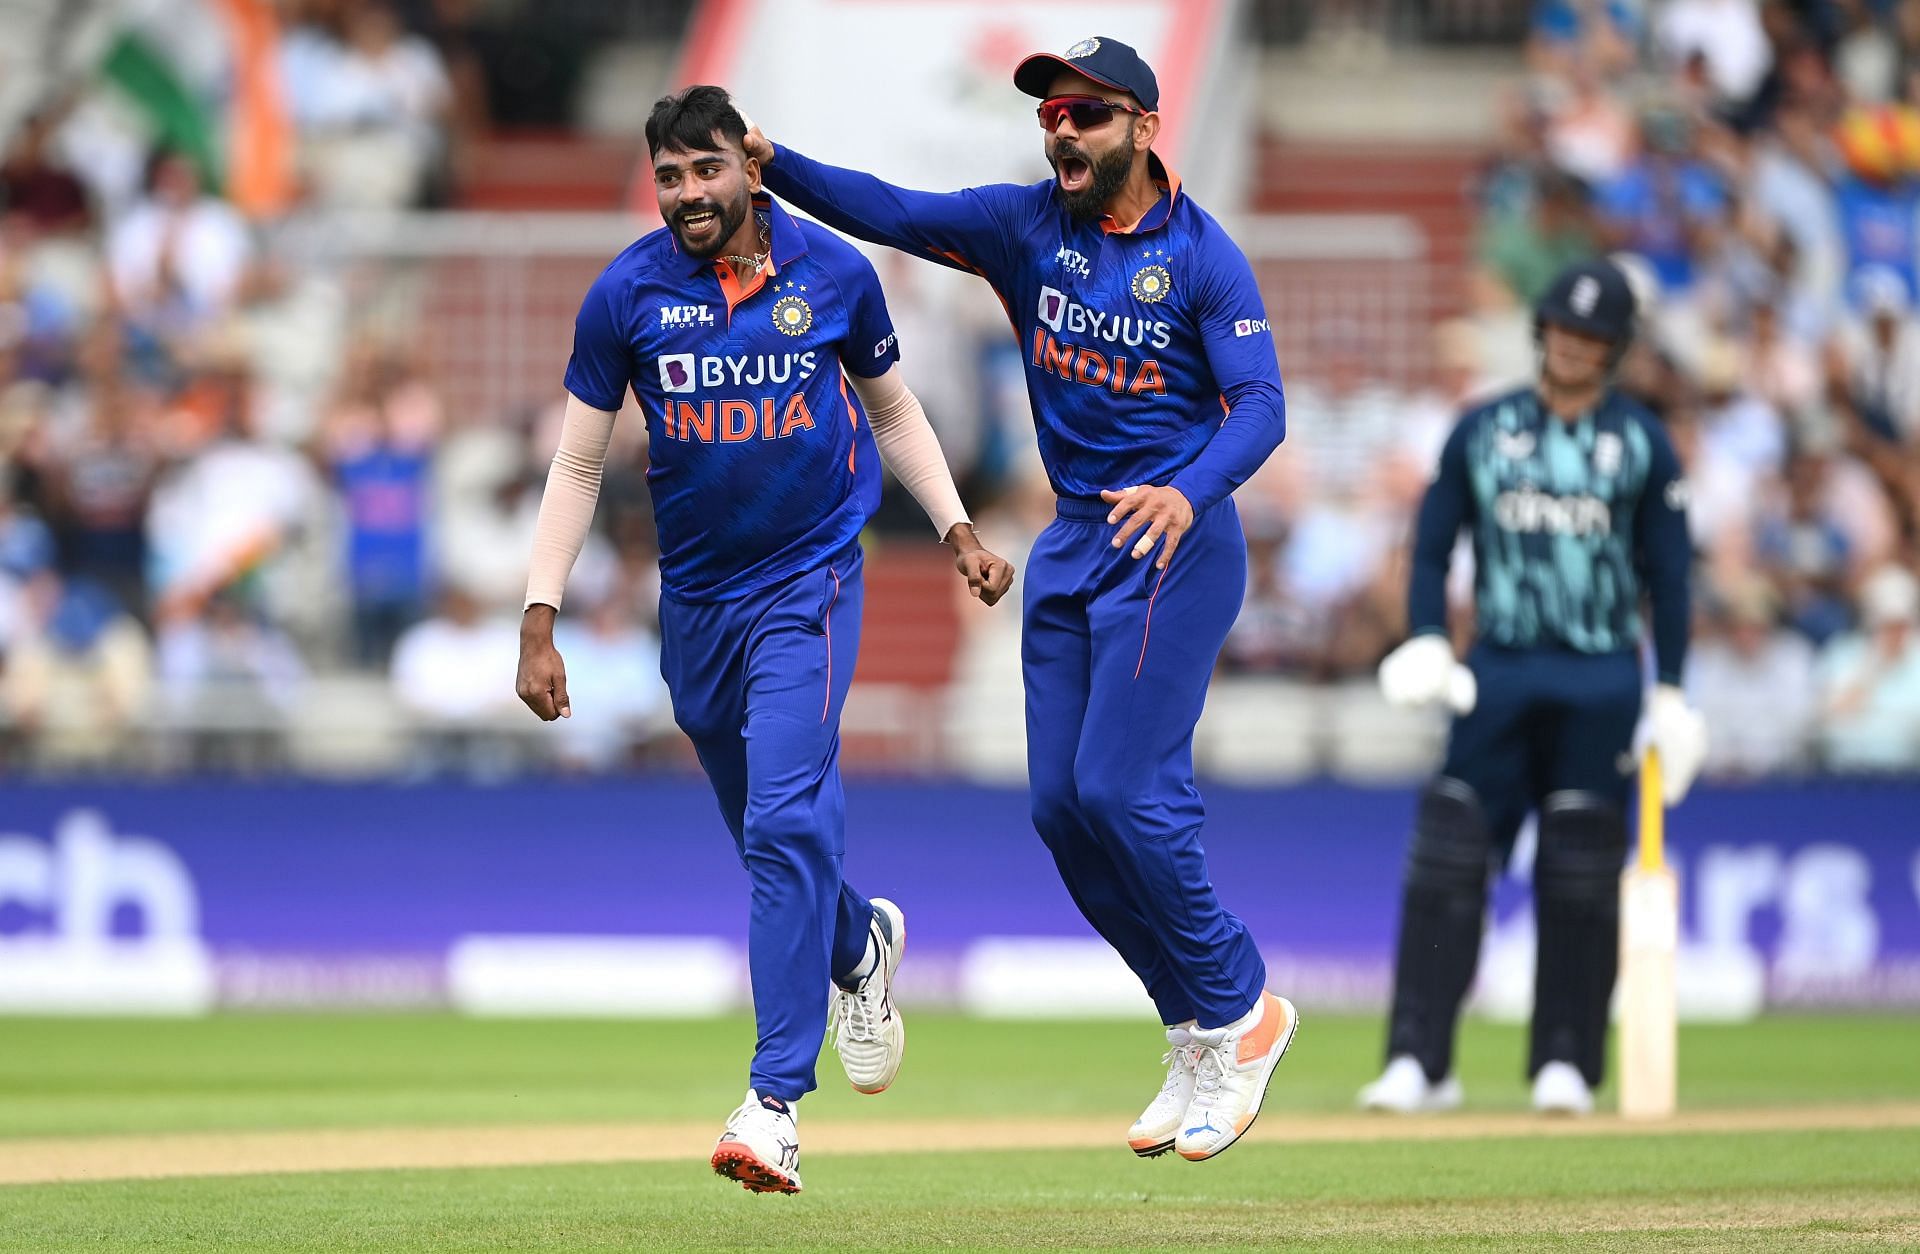 Mohammed Siraj dismissed Jonny Bairstow and Joe Root for ducks in the only ODI he played in England